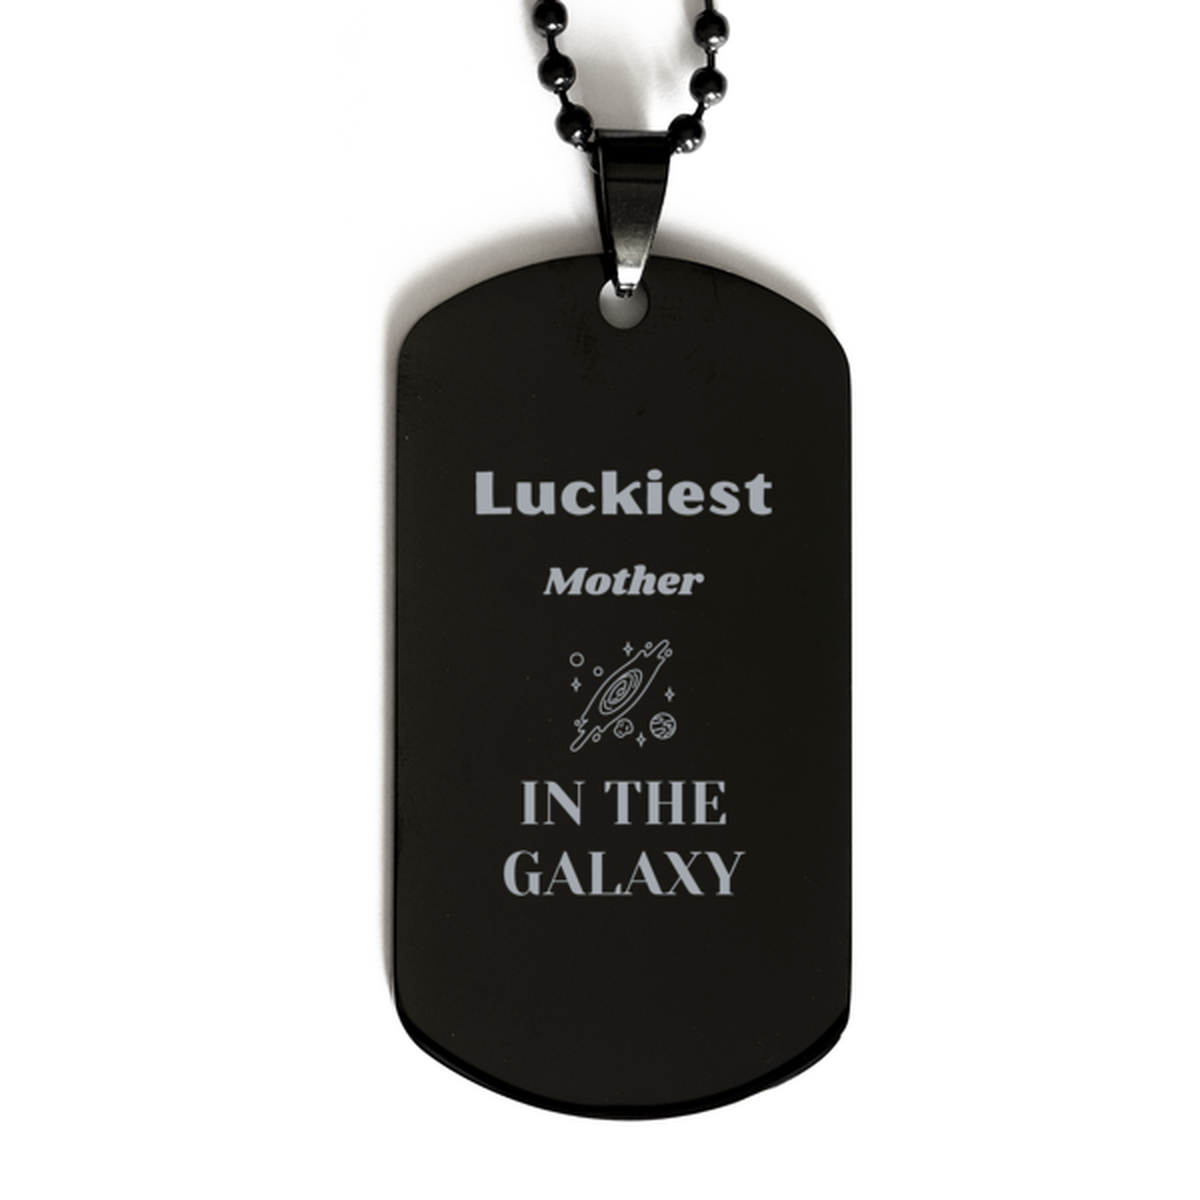 Luckiest Mother in the Galaxy, To My Mother Engraved Gifts, Christmas Mother Black Dog Tag Gifts, X-mas Birthday Unique Gifts For Mother Men Women